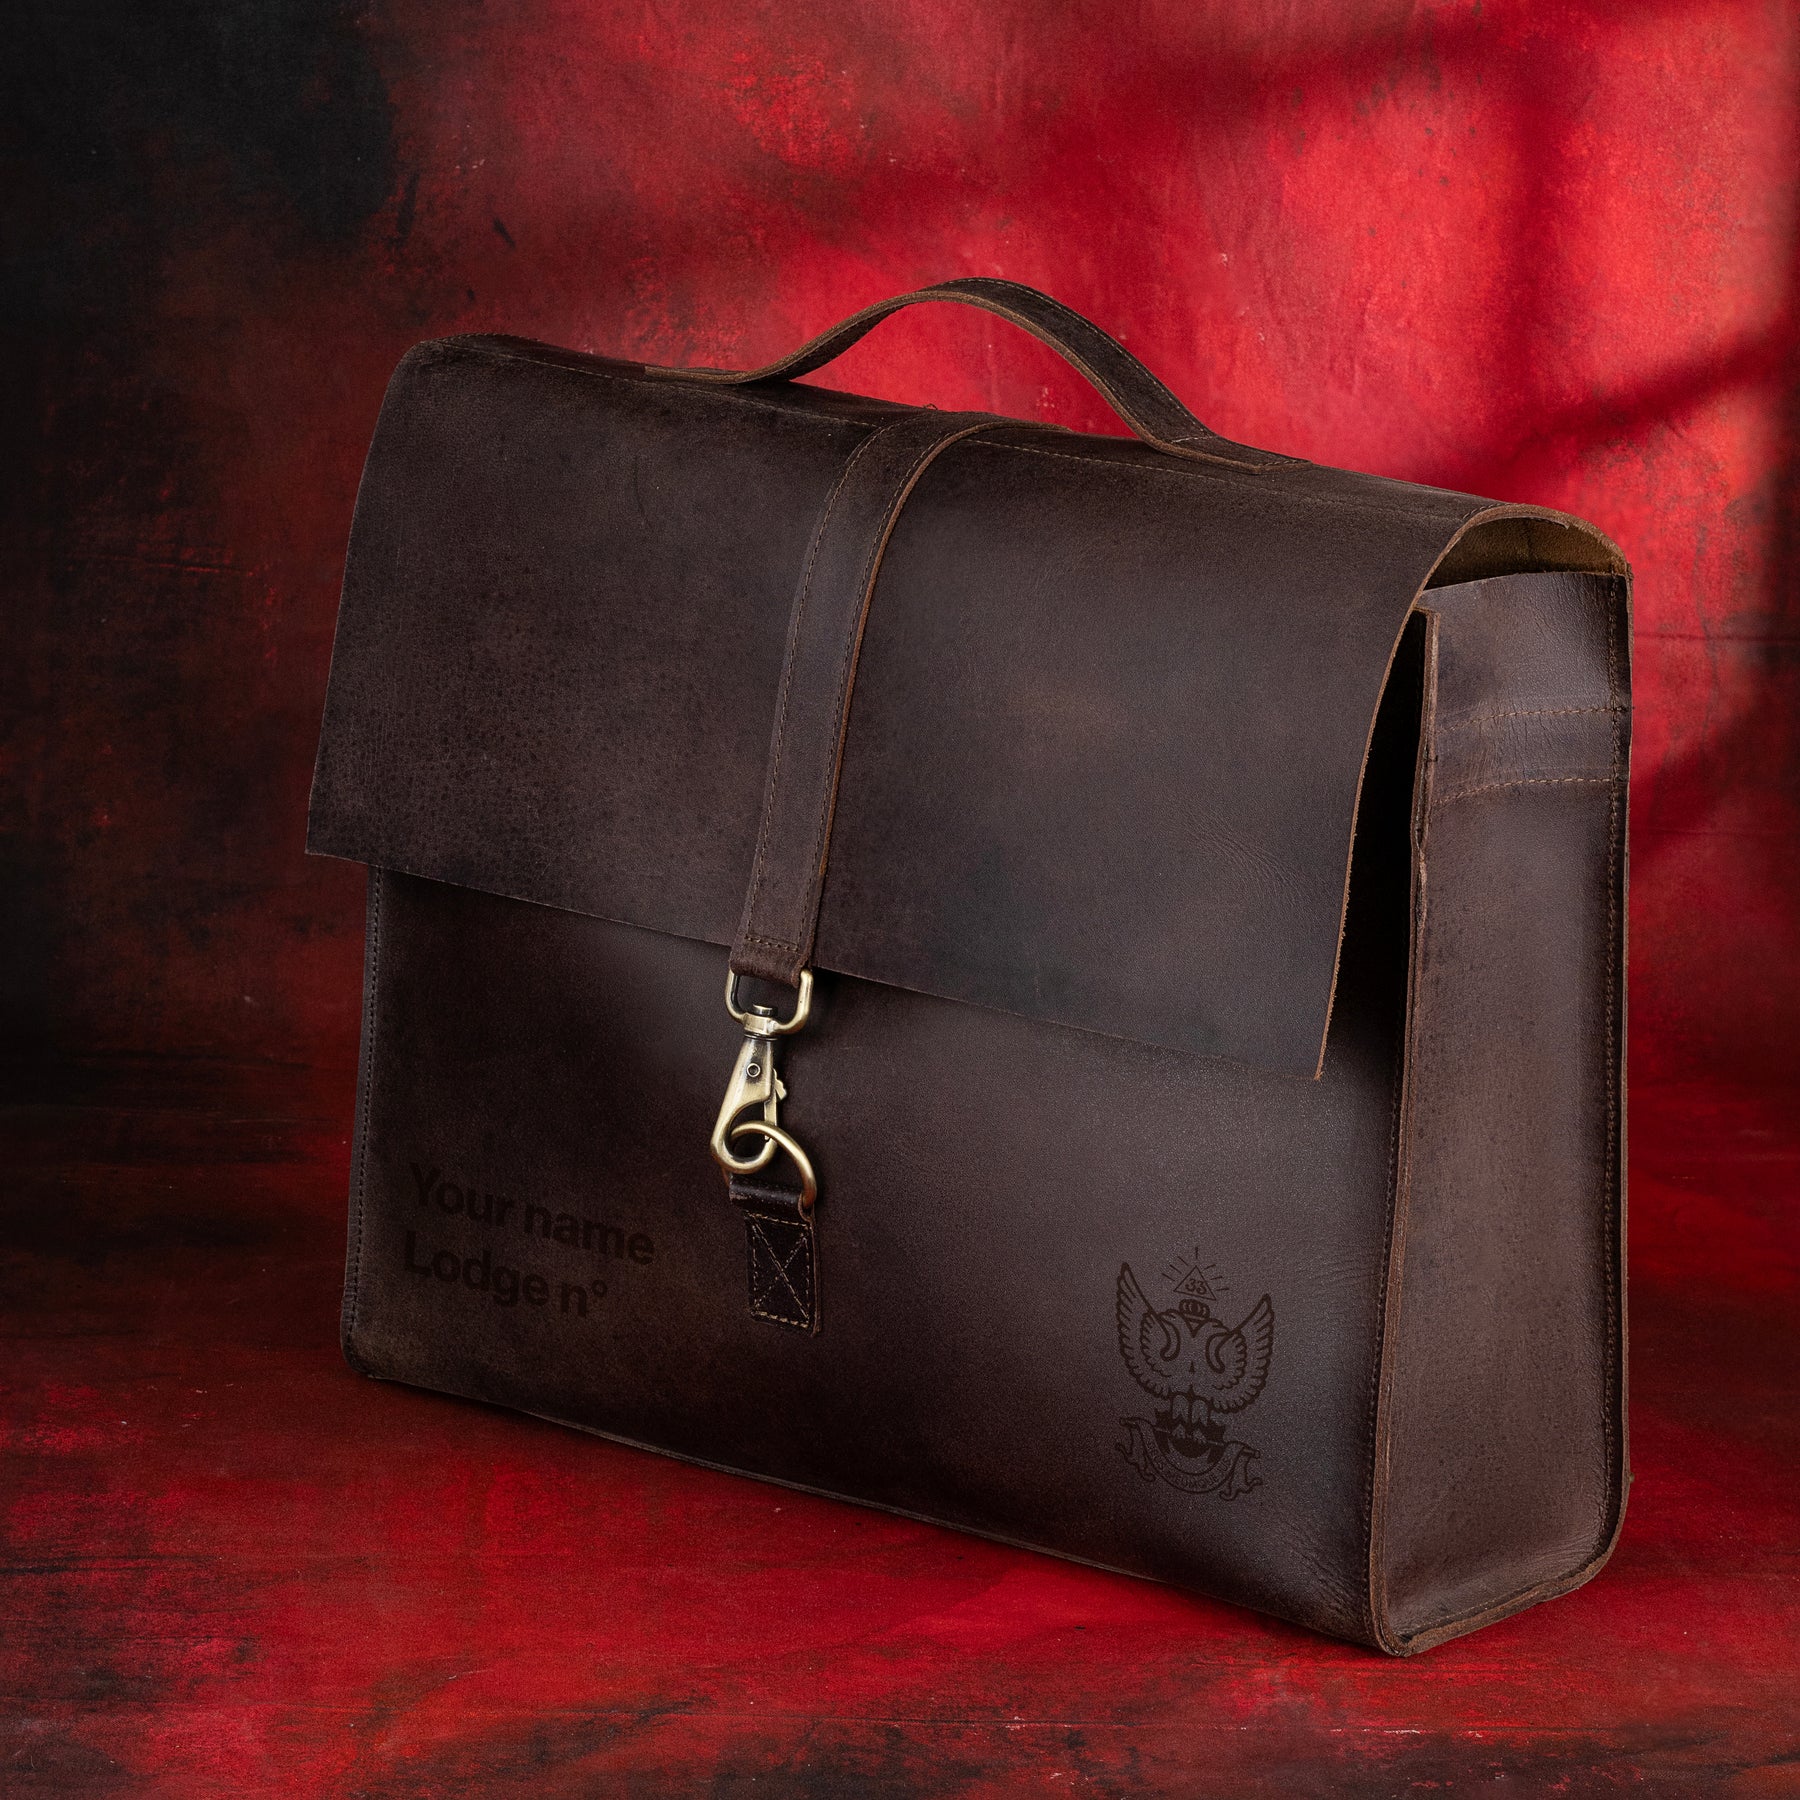 33rd Degree Scottish Rite Briefcase - Wings Up Genuine Cow Leather Convertible Bag - Bricks Masons